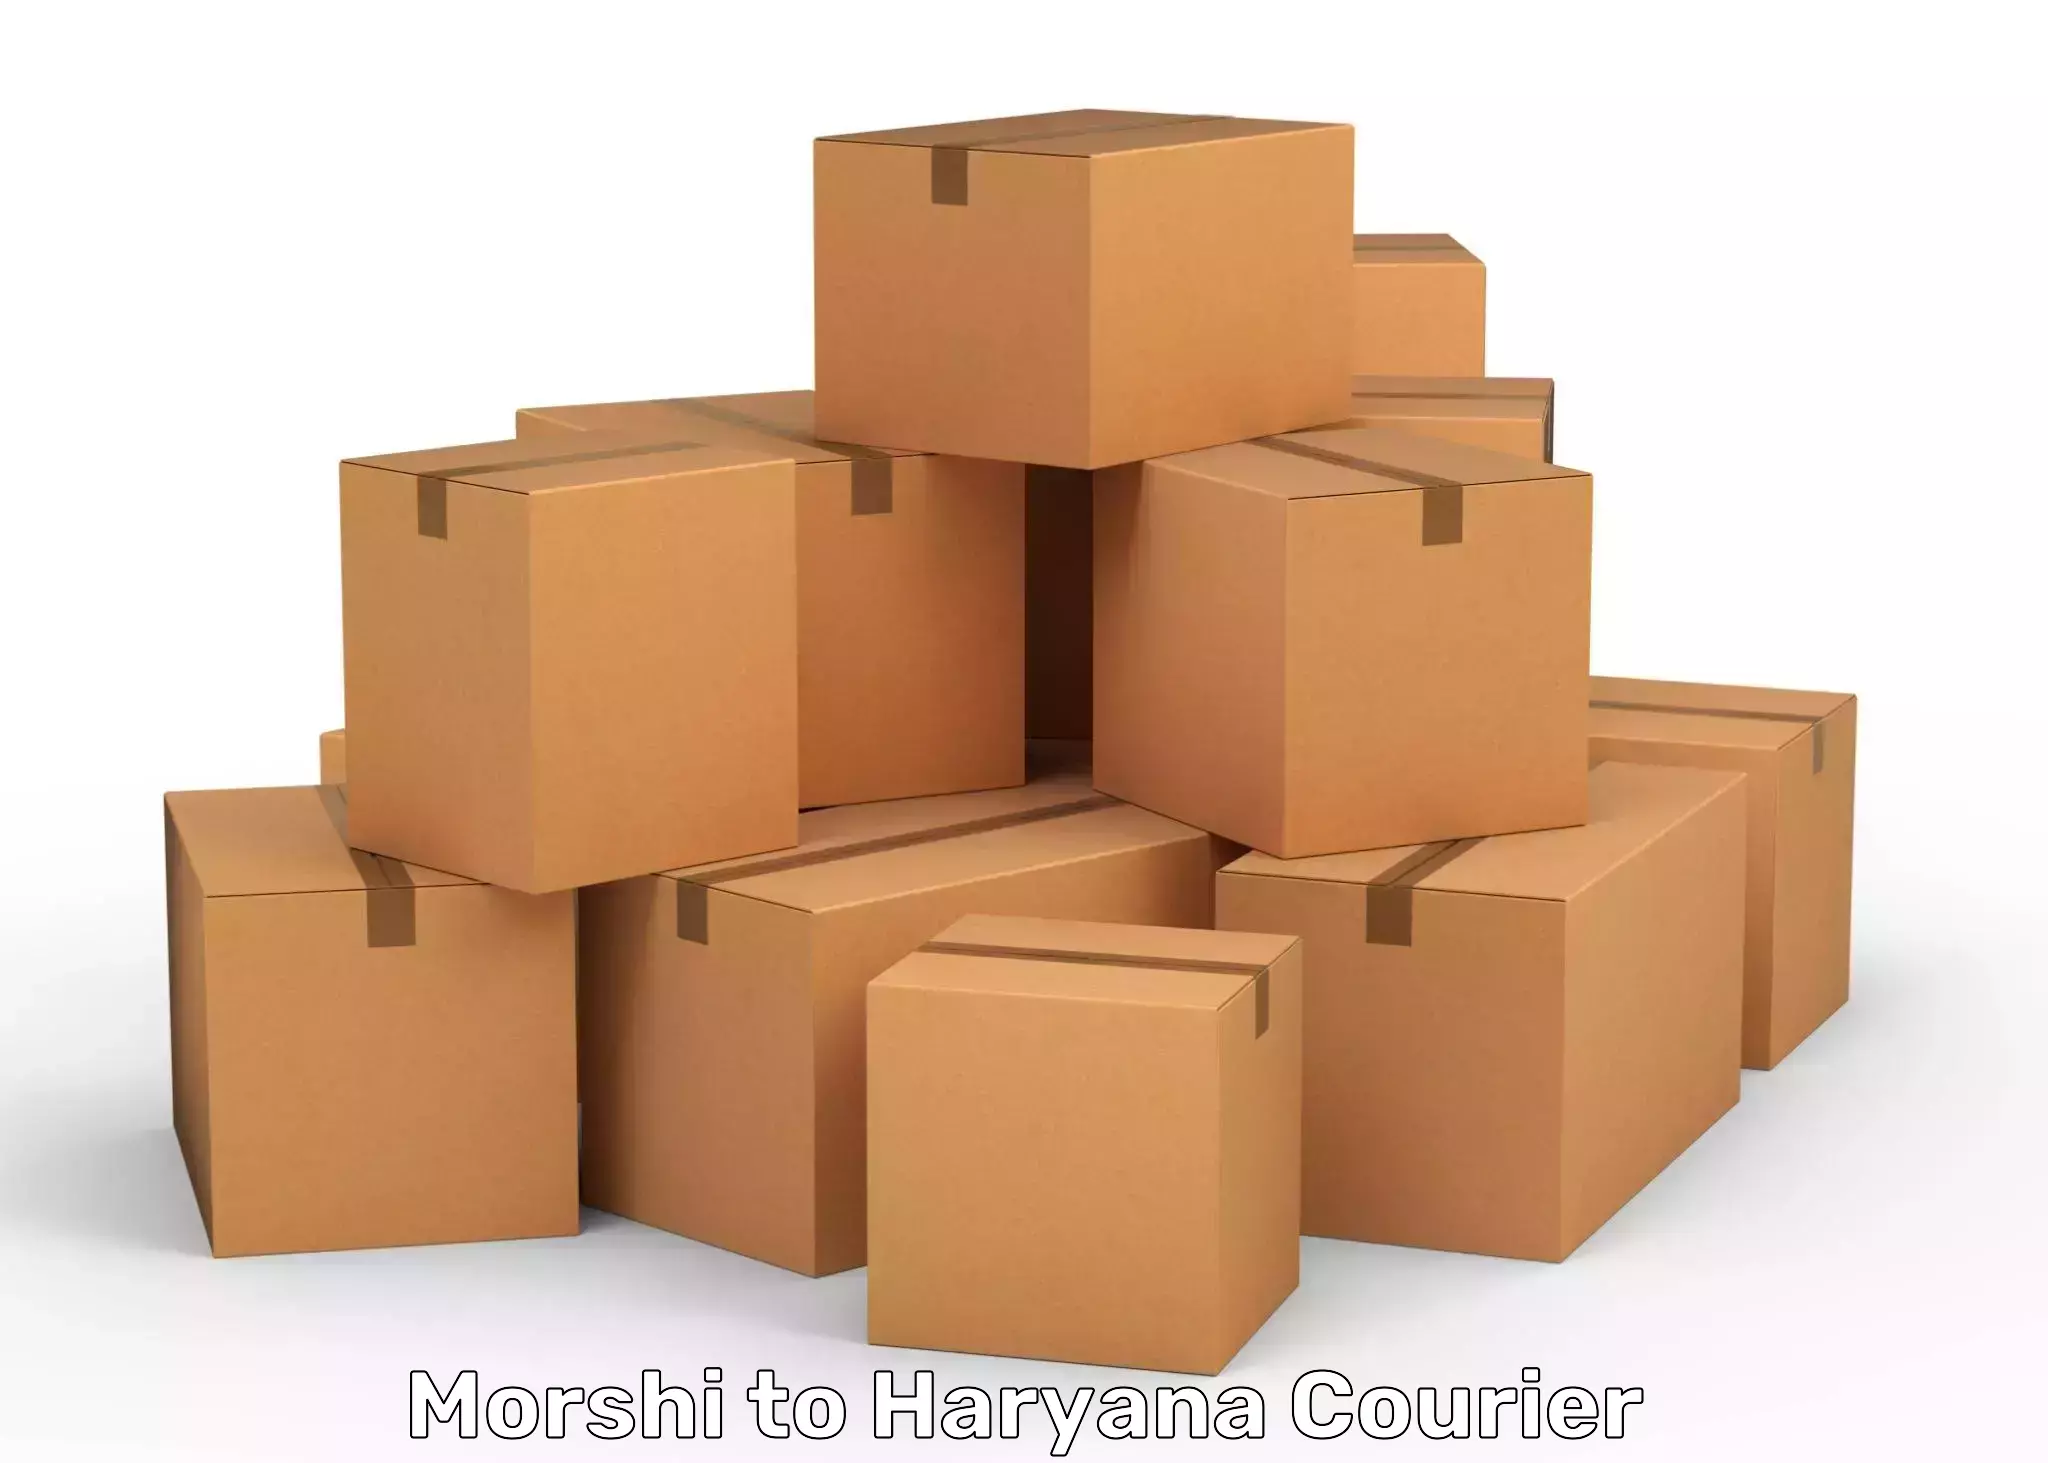 Specialized shipment handling in Morshi to NCR Haryana